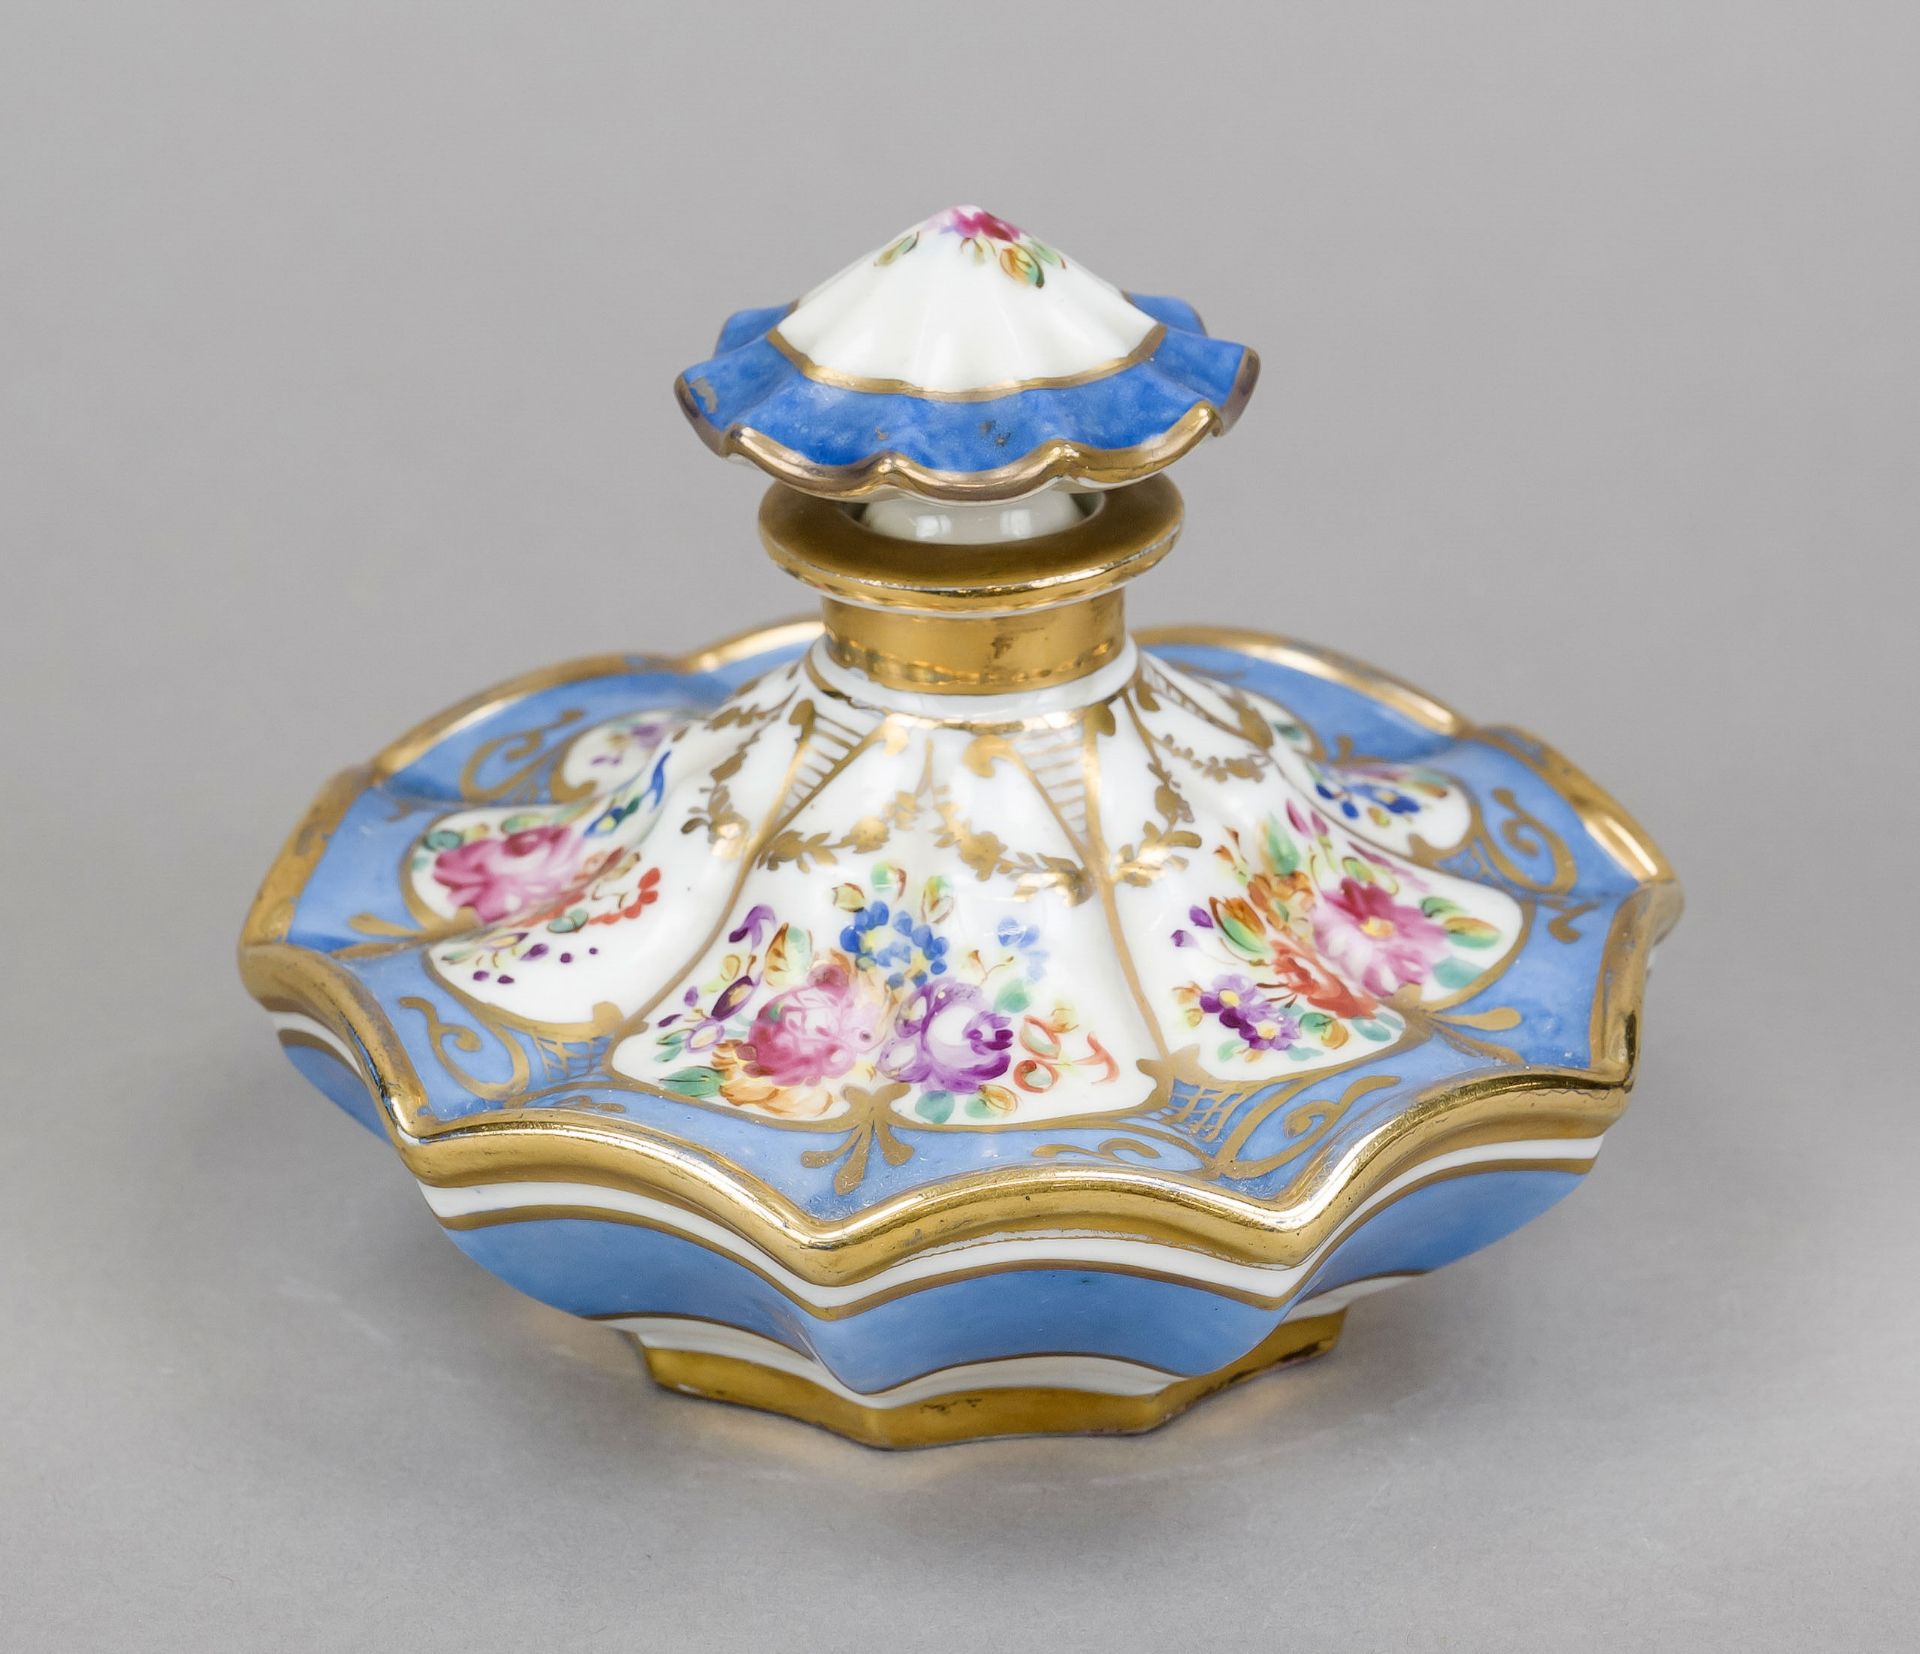 Flask with stopper, France, 19th century, Sevres imitation mark, curved historicist form, polychrome